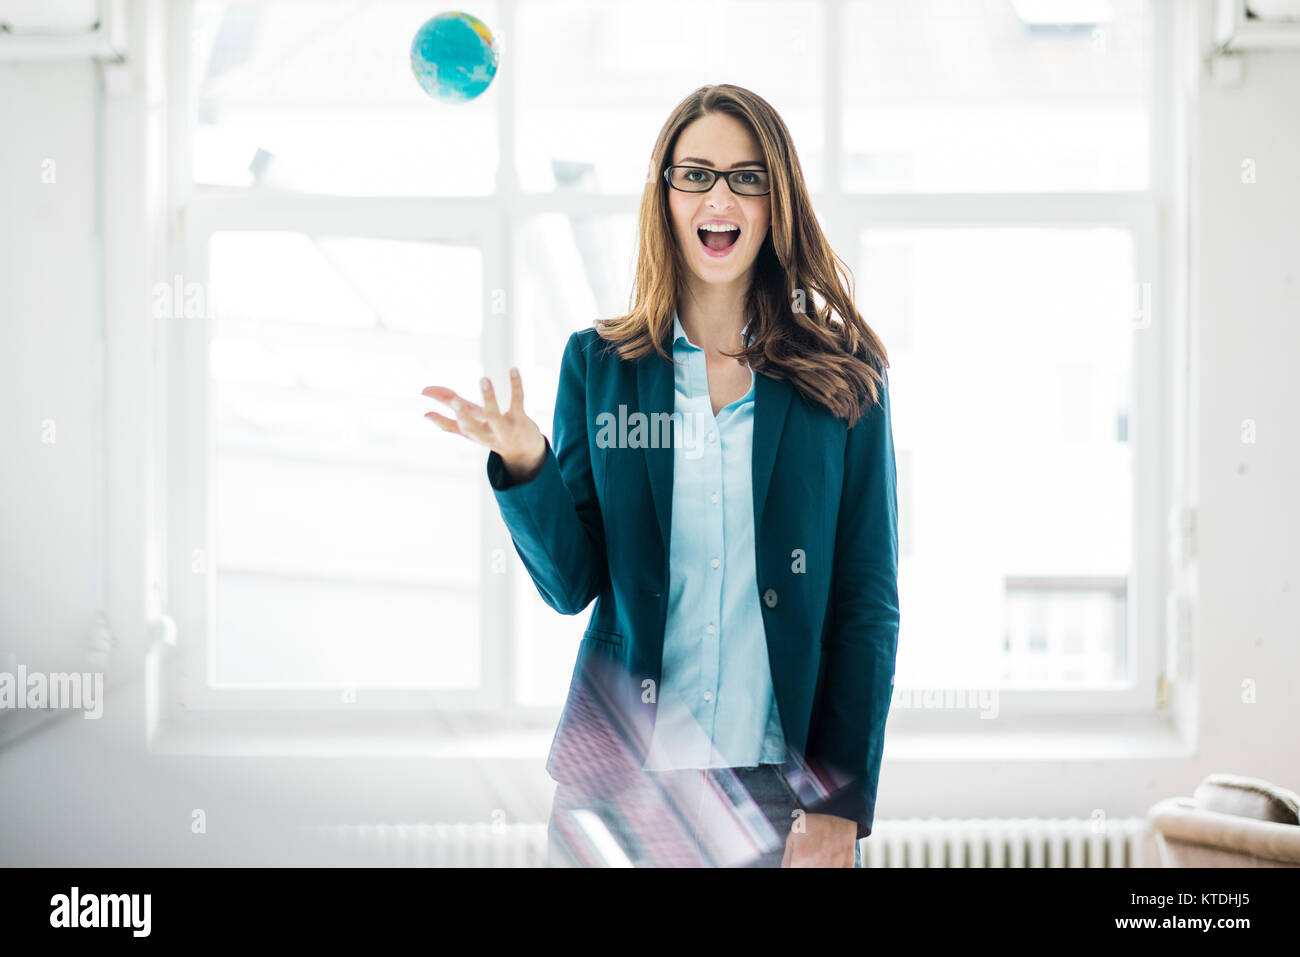 Portrait of businesswoman throwing small globe in the air Stock Photo